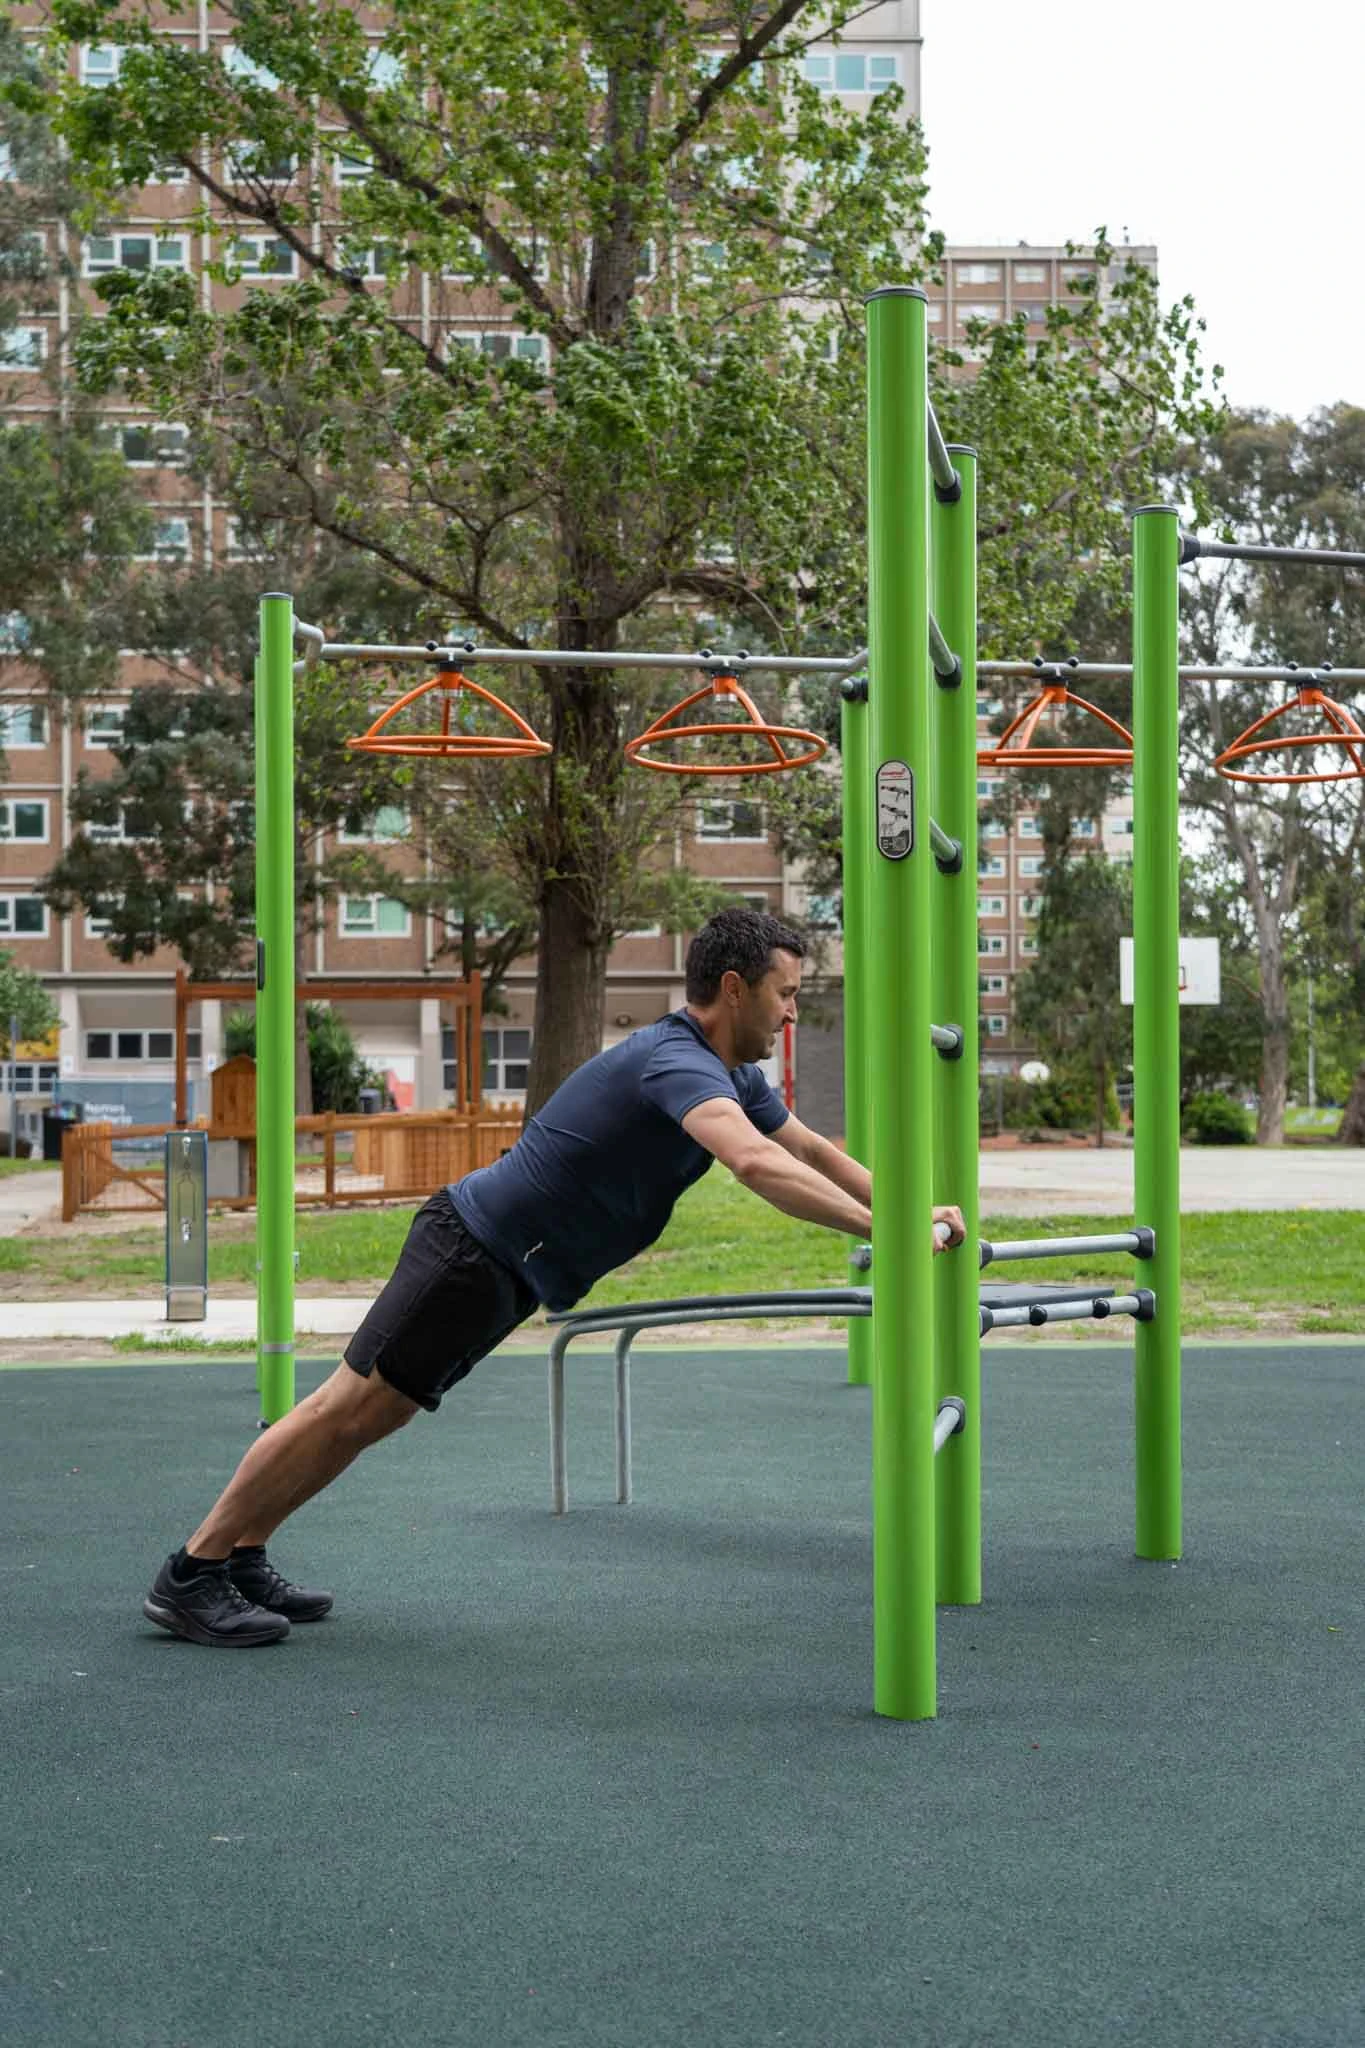 a group of people working out in an outdoor callisthenics gym in a park